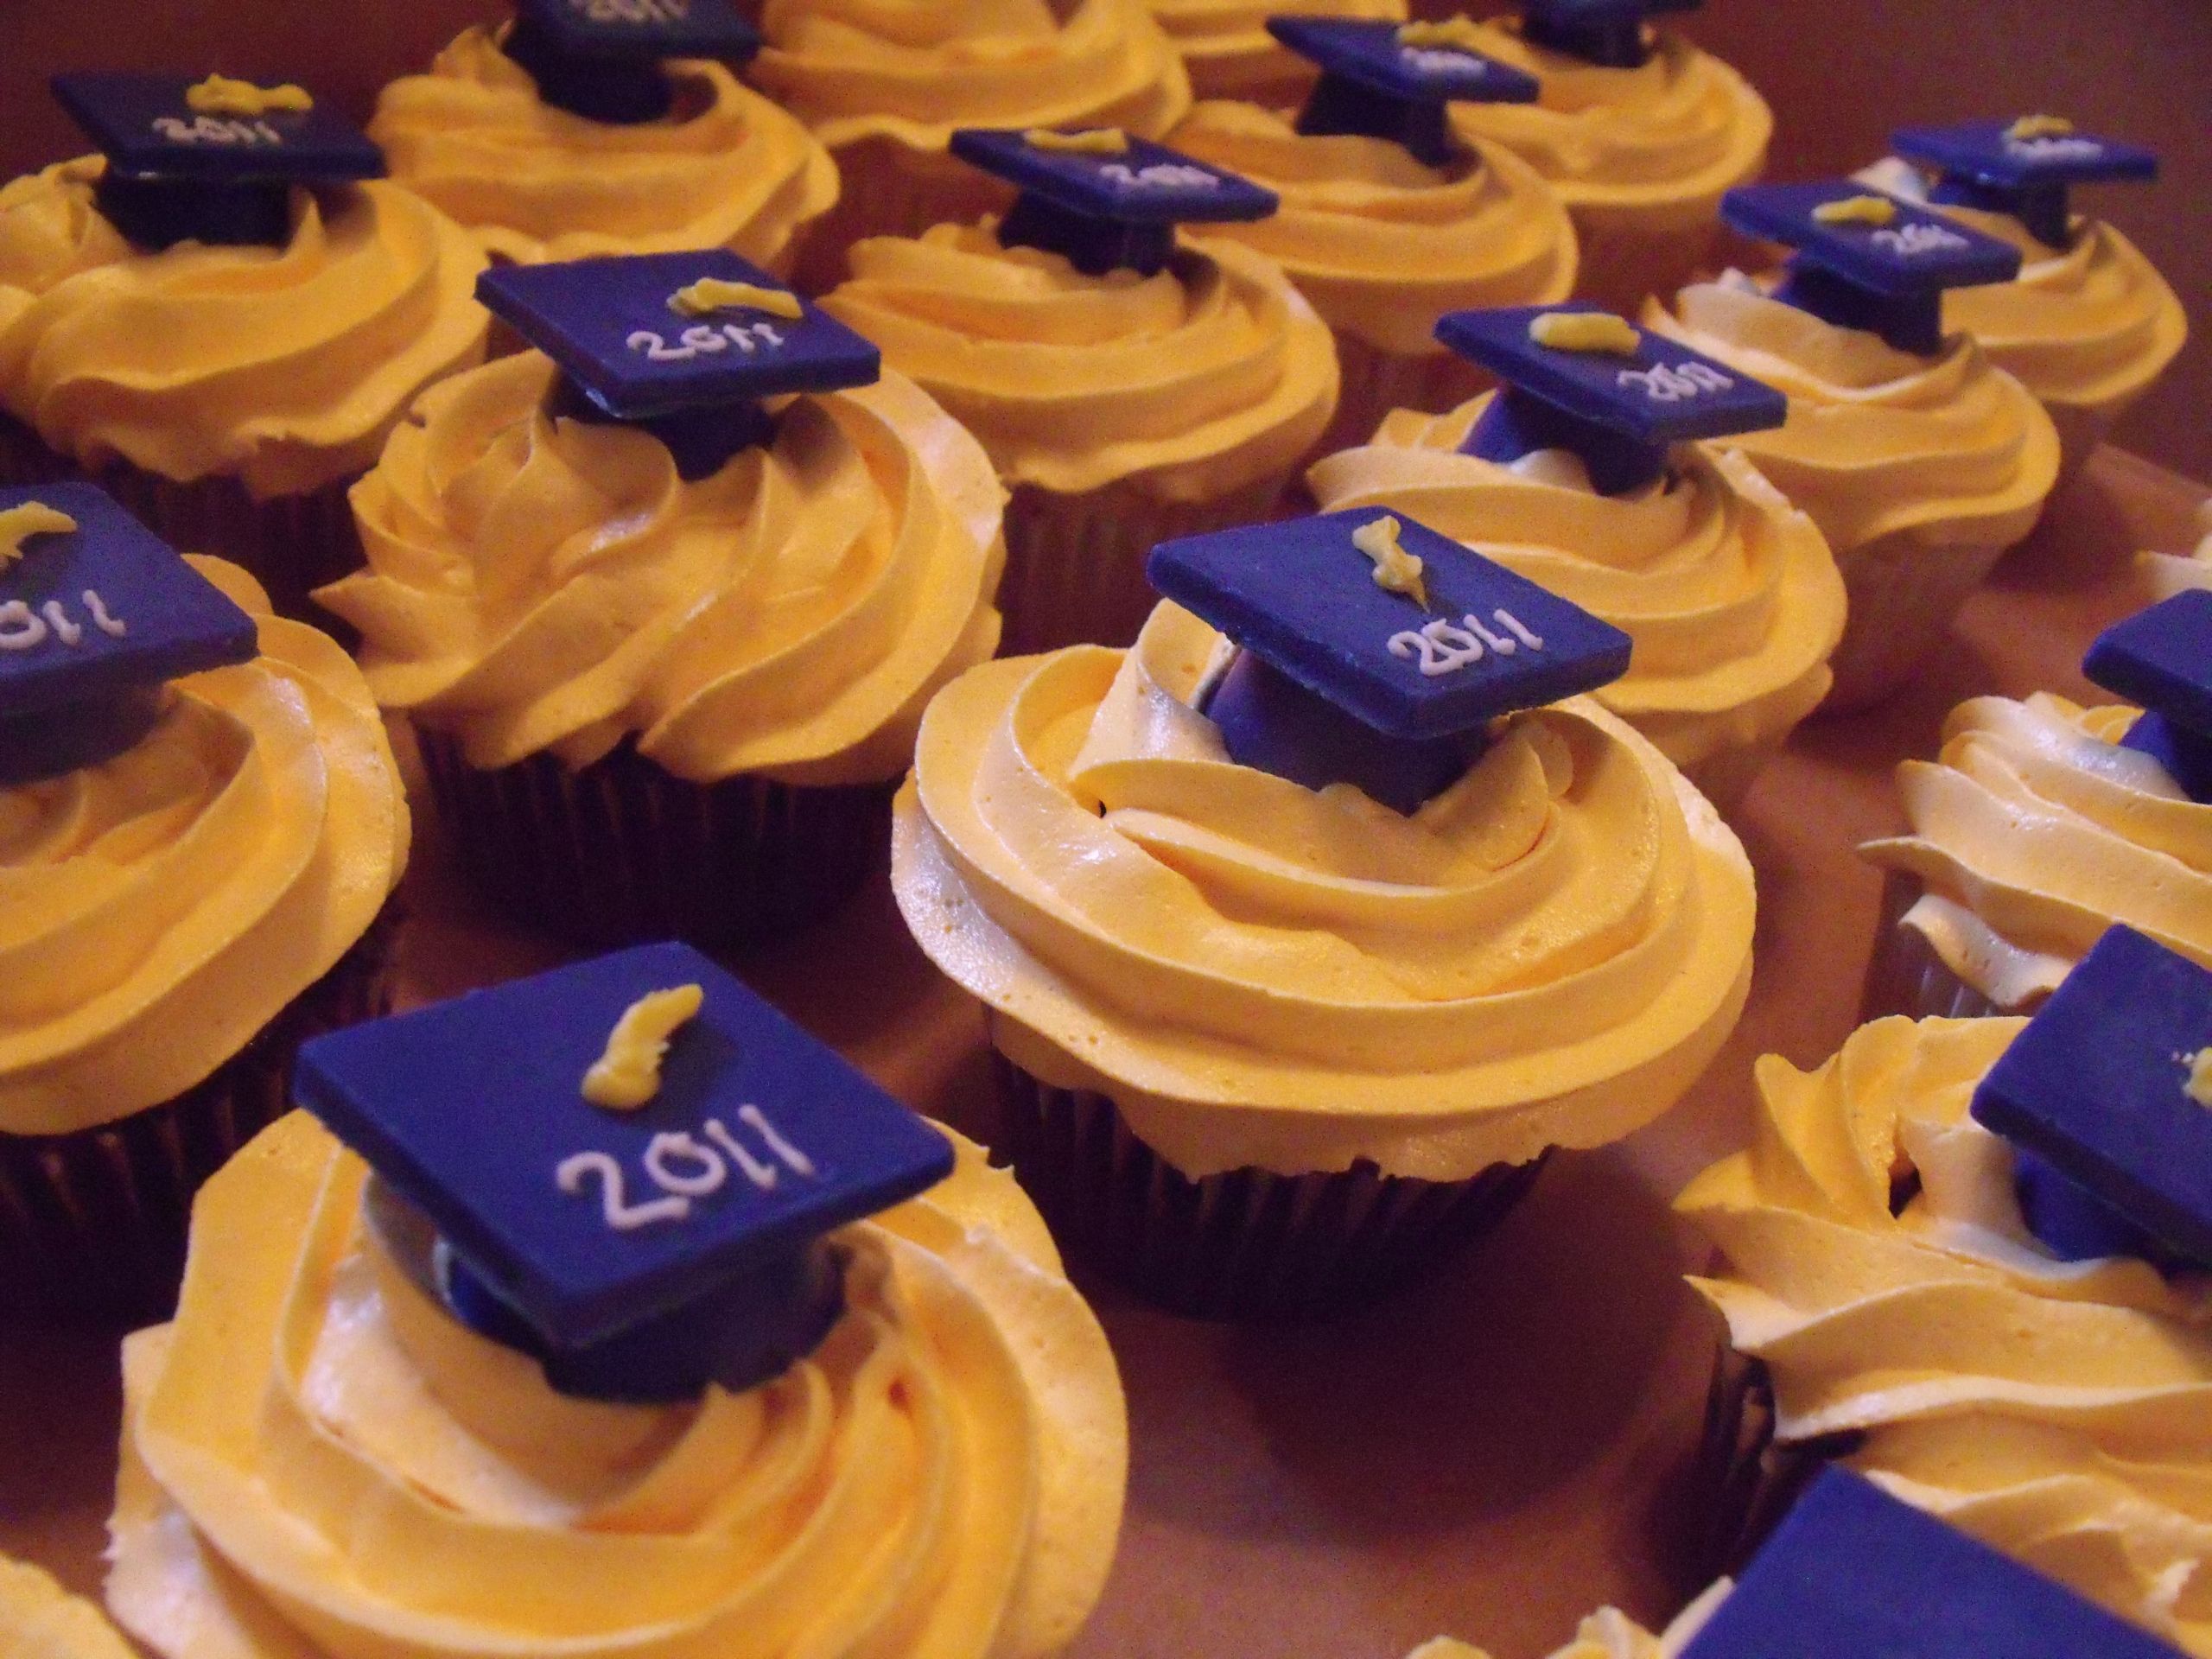 Blue And Gold Graduation Party Ideas
 Graduation Cup Cakes Blue and Gold